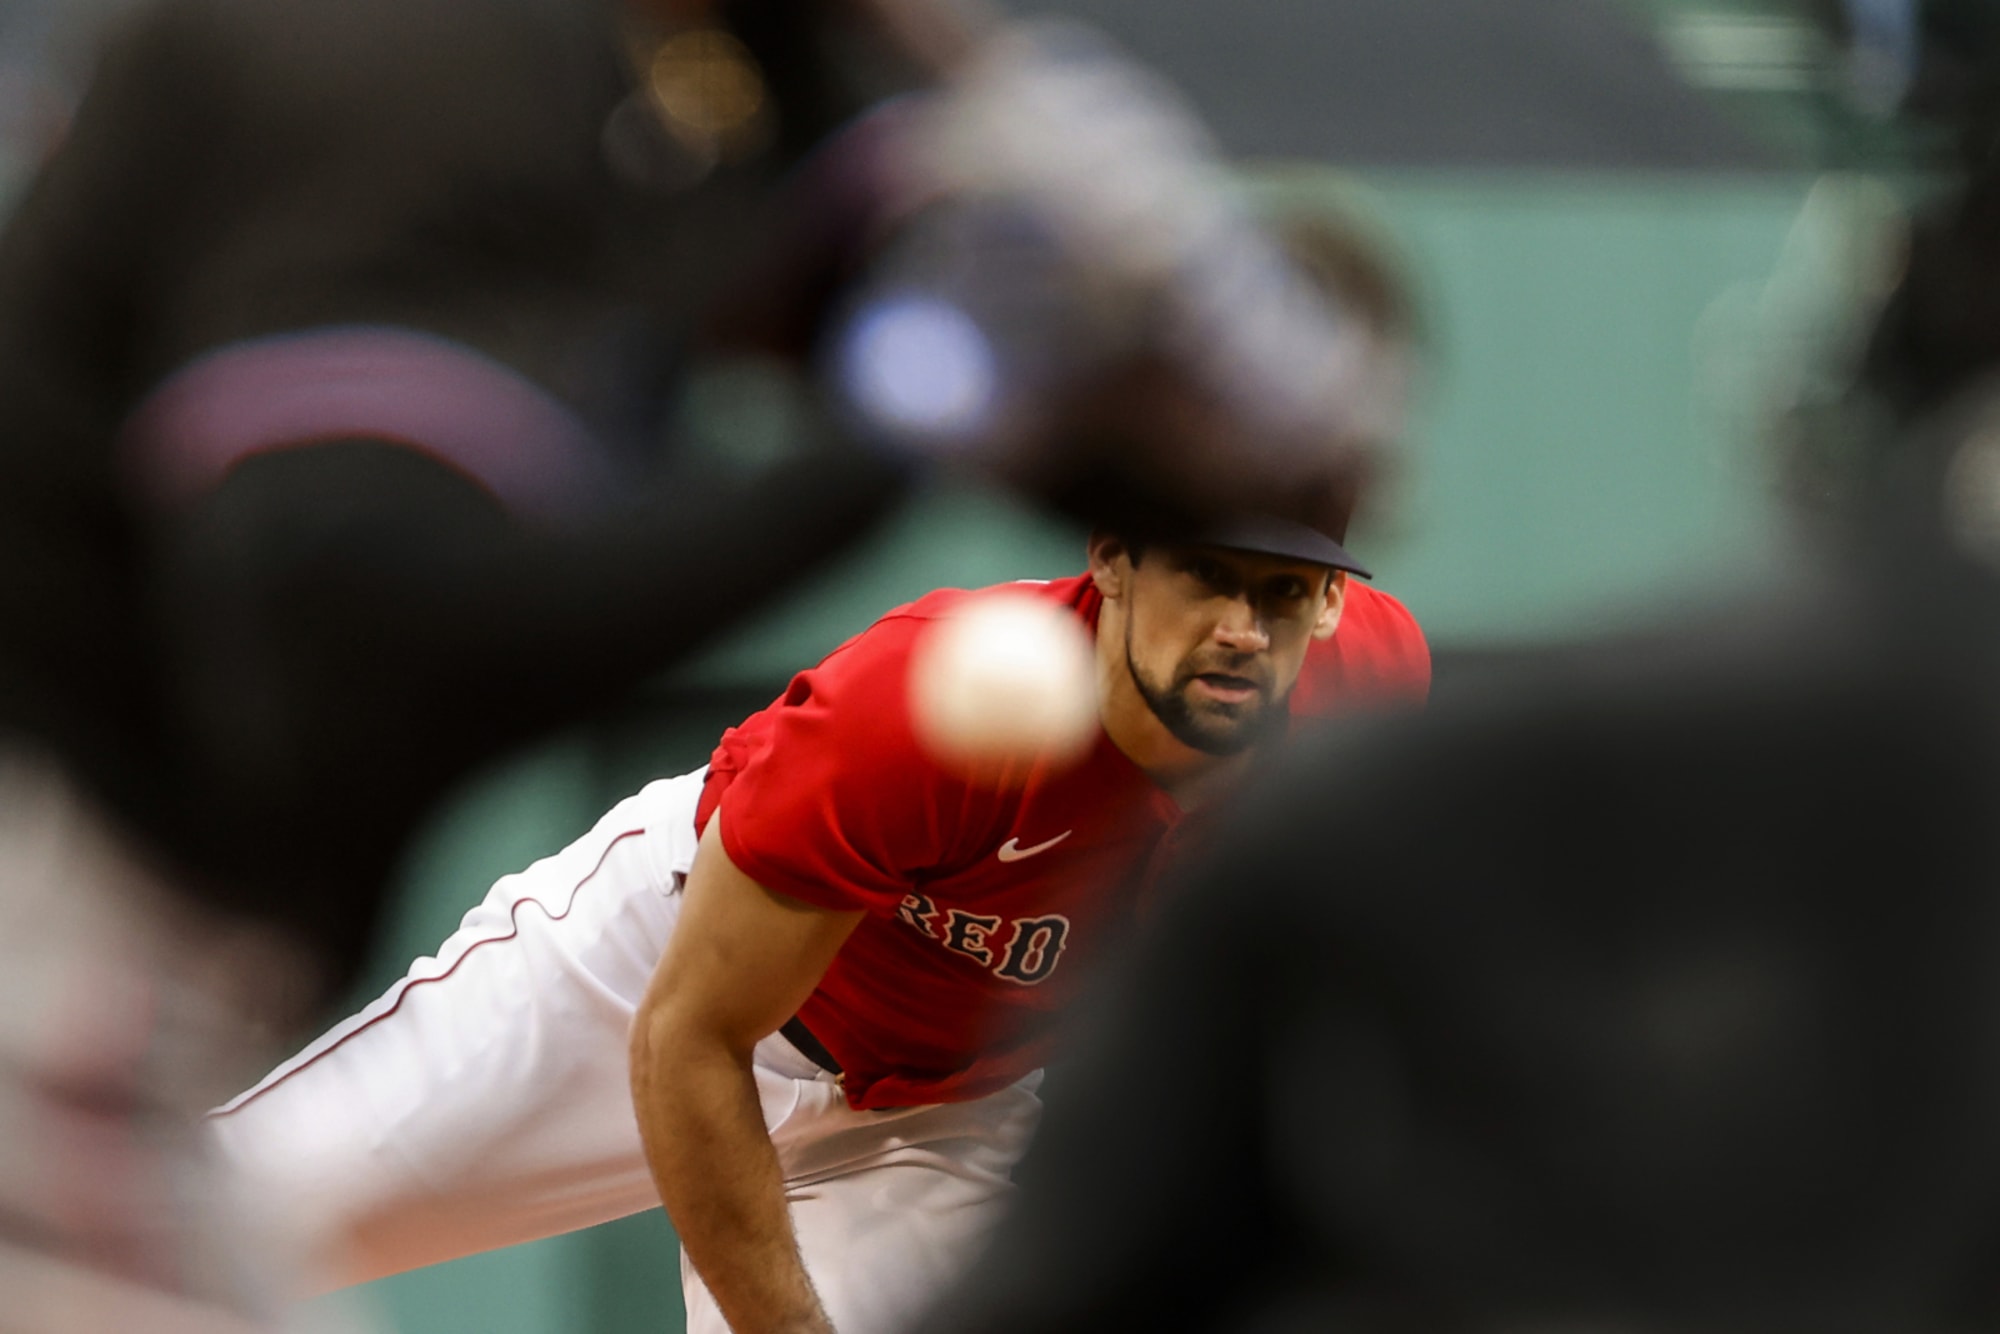 Boston Red Sox starting pitcher Nathan Eovaldi during the first